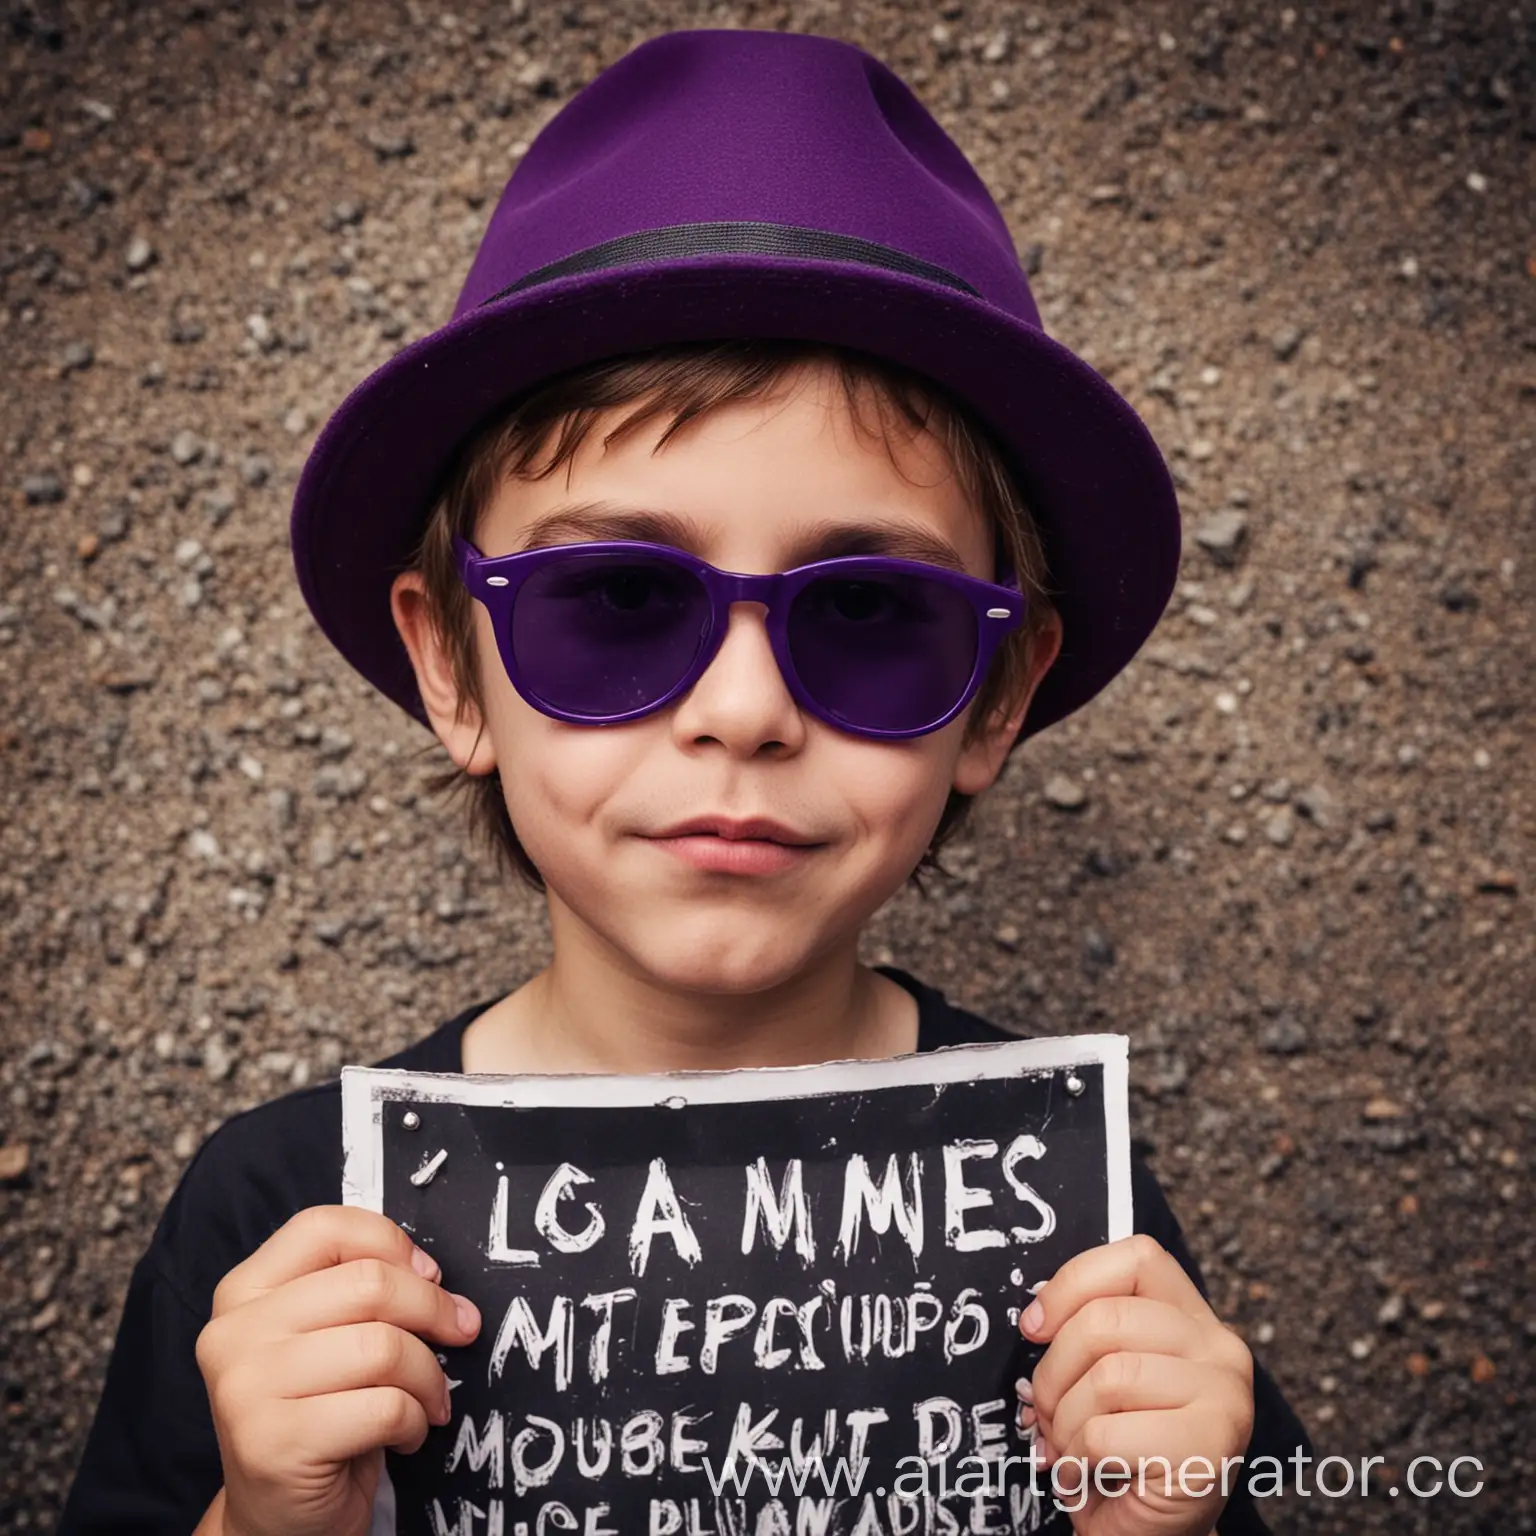 Boy-in-Purple-Hat-with-Dark-Sunglasses-Making-Grimace-Sign